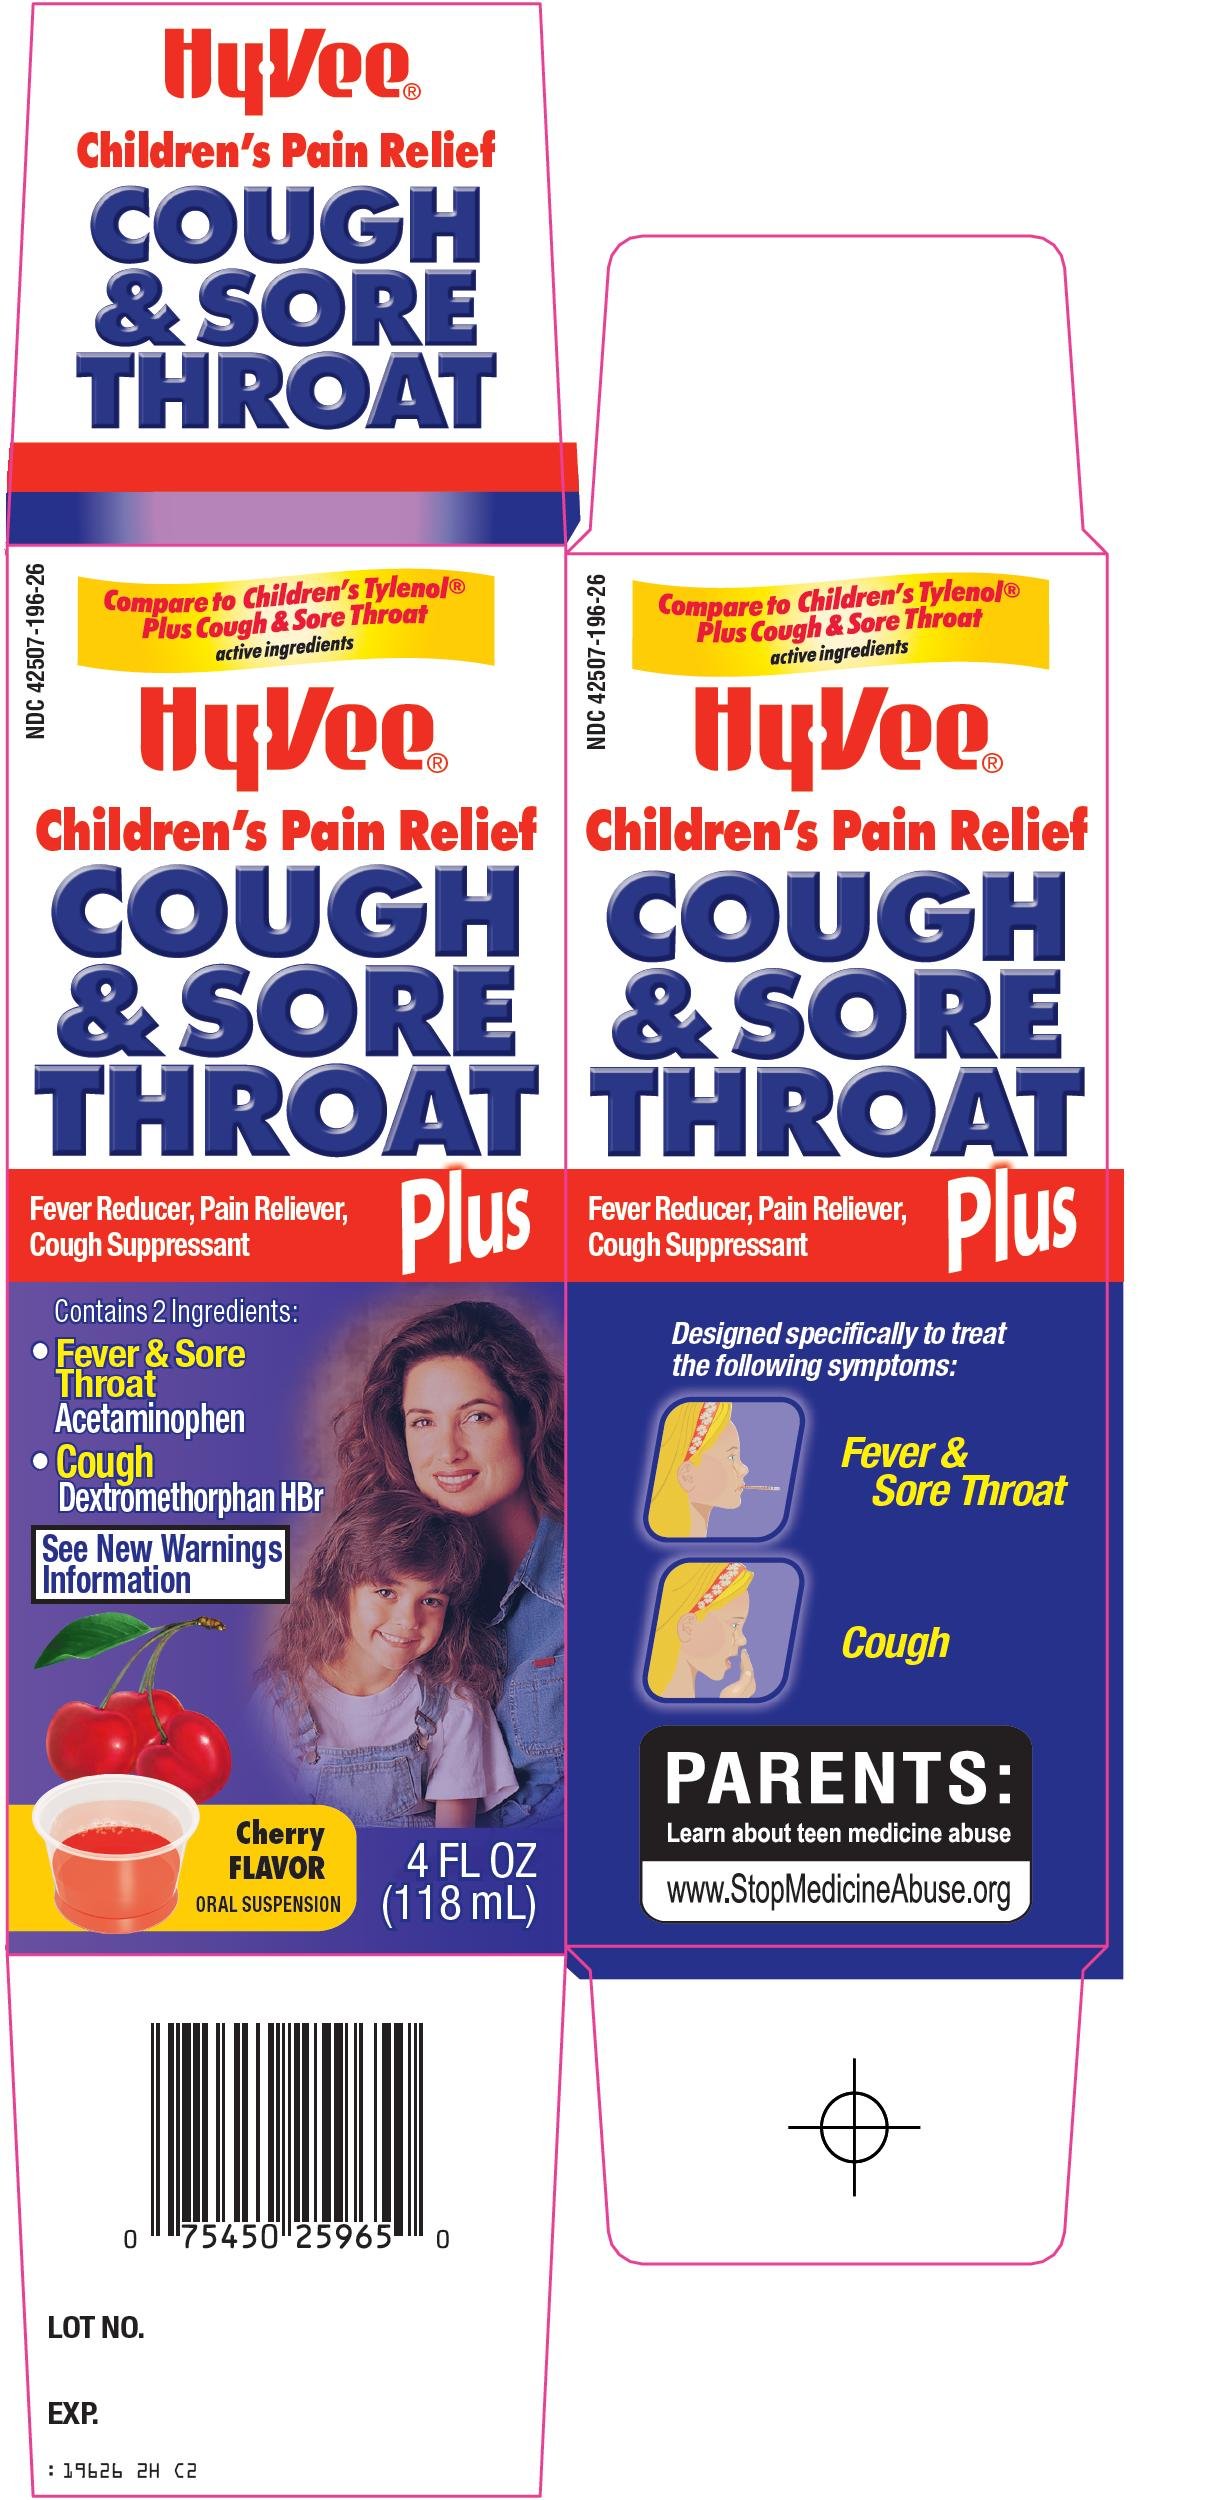 Cough and Sore Throat Carton Image 1